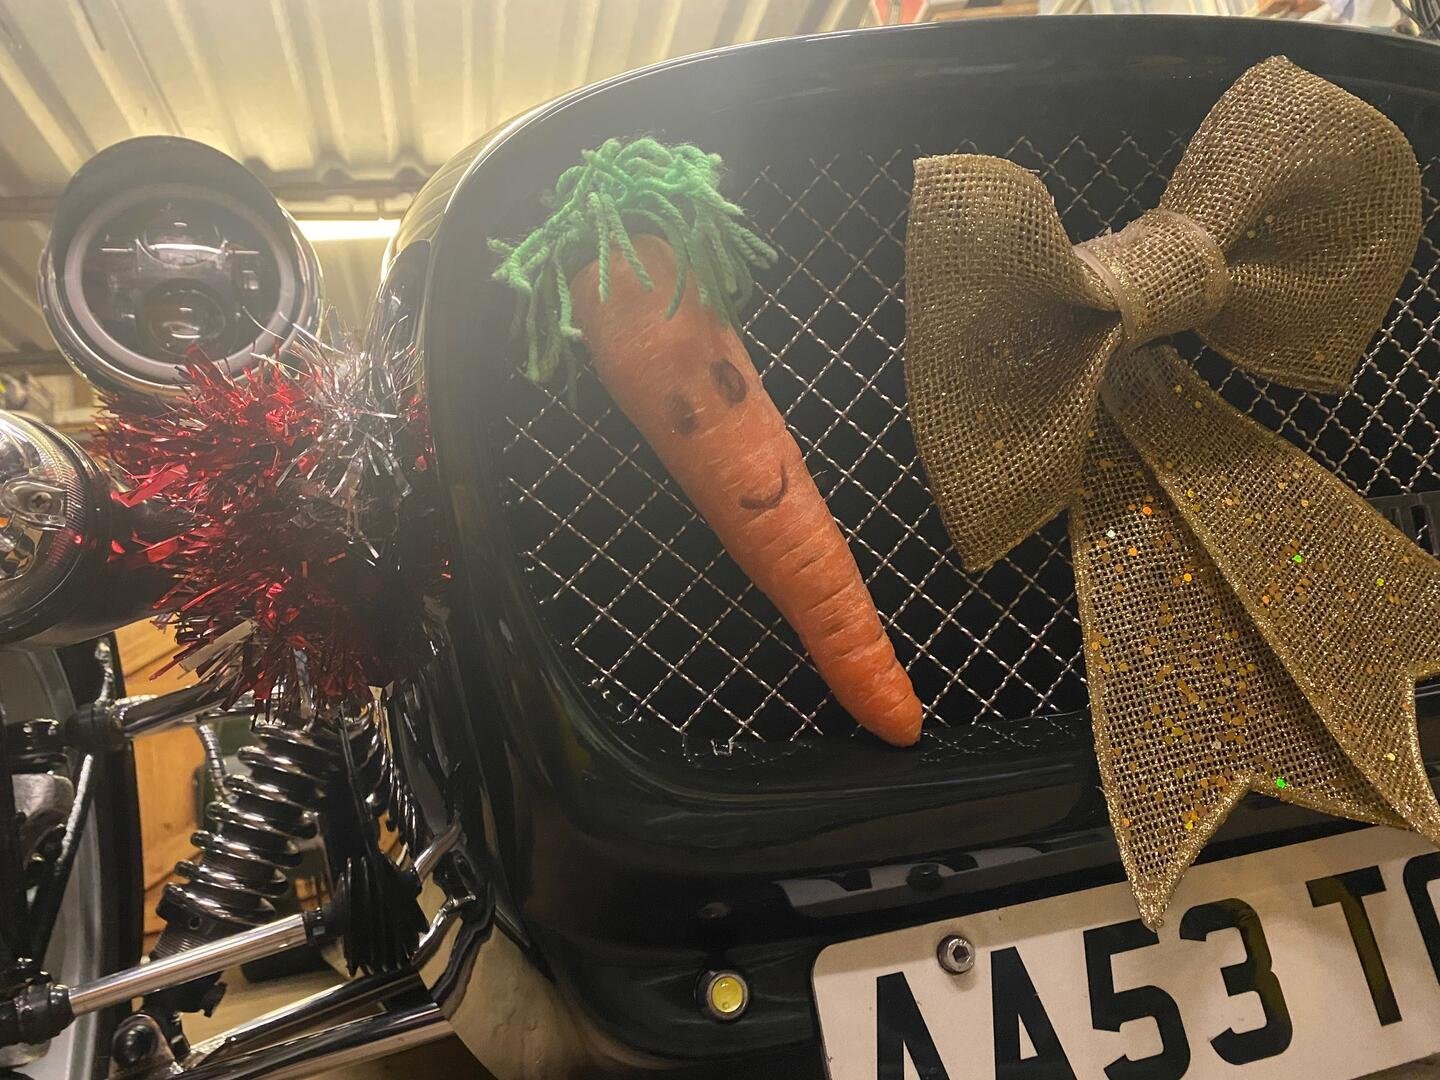 Kevin the Carrot.jpg